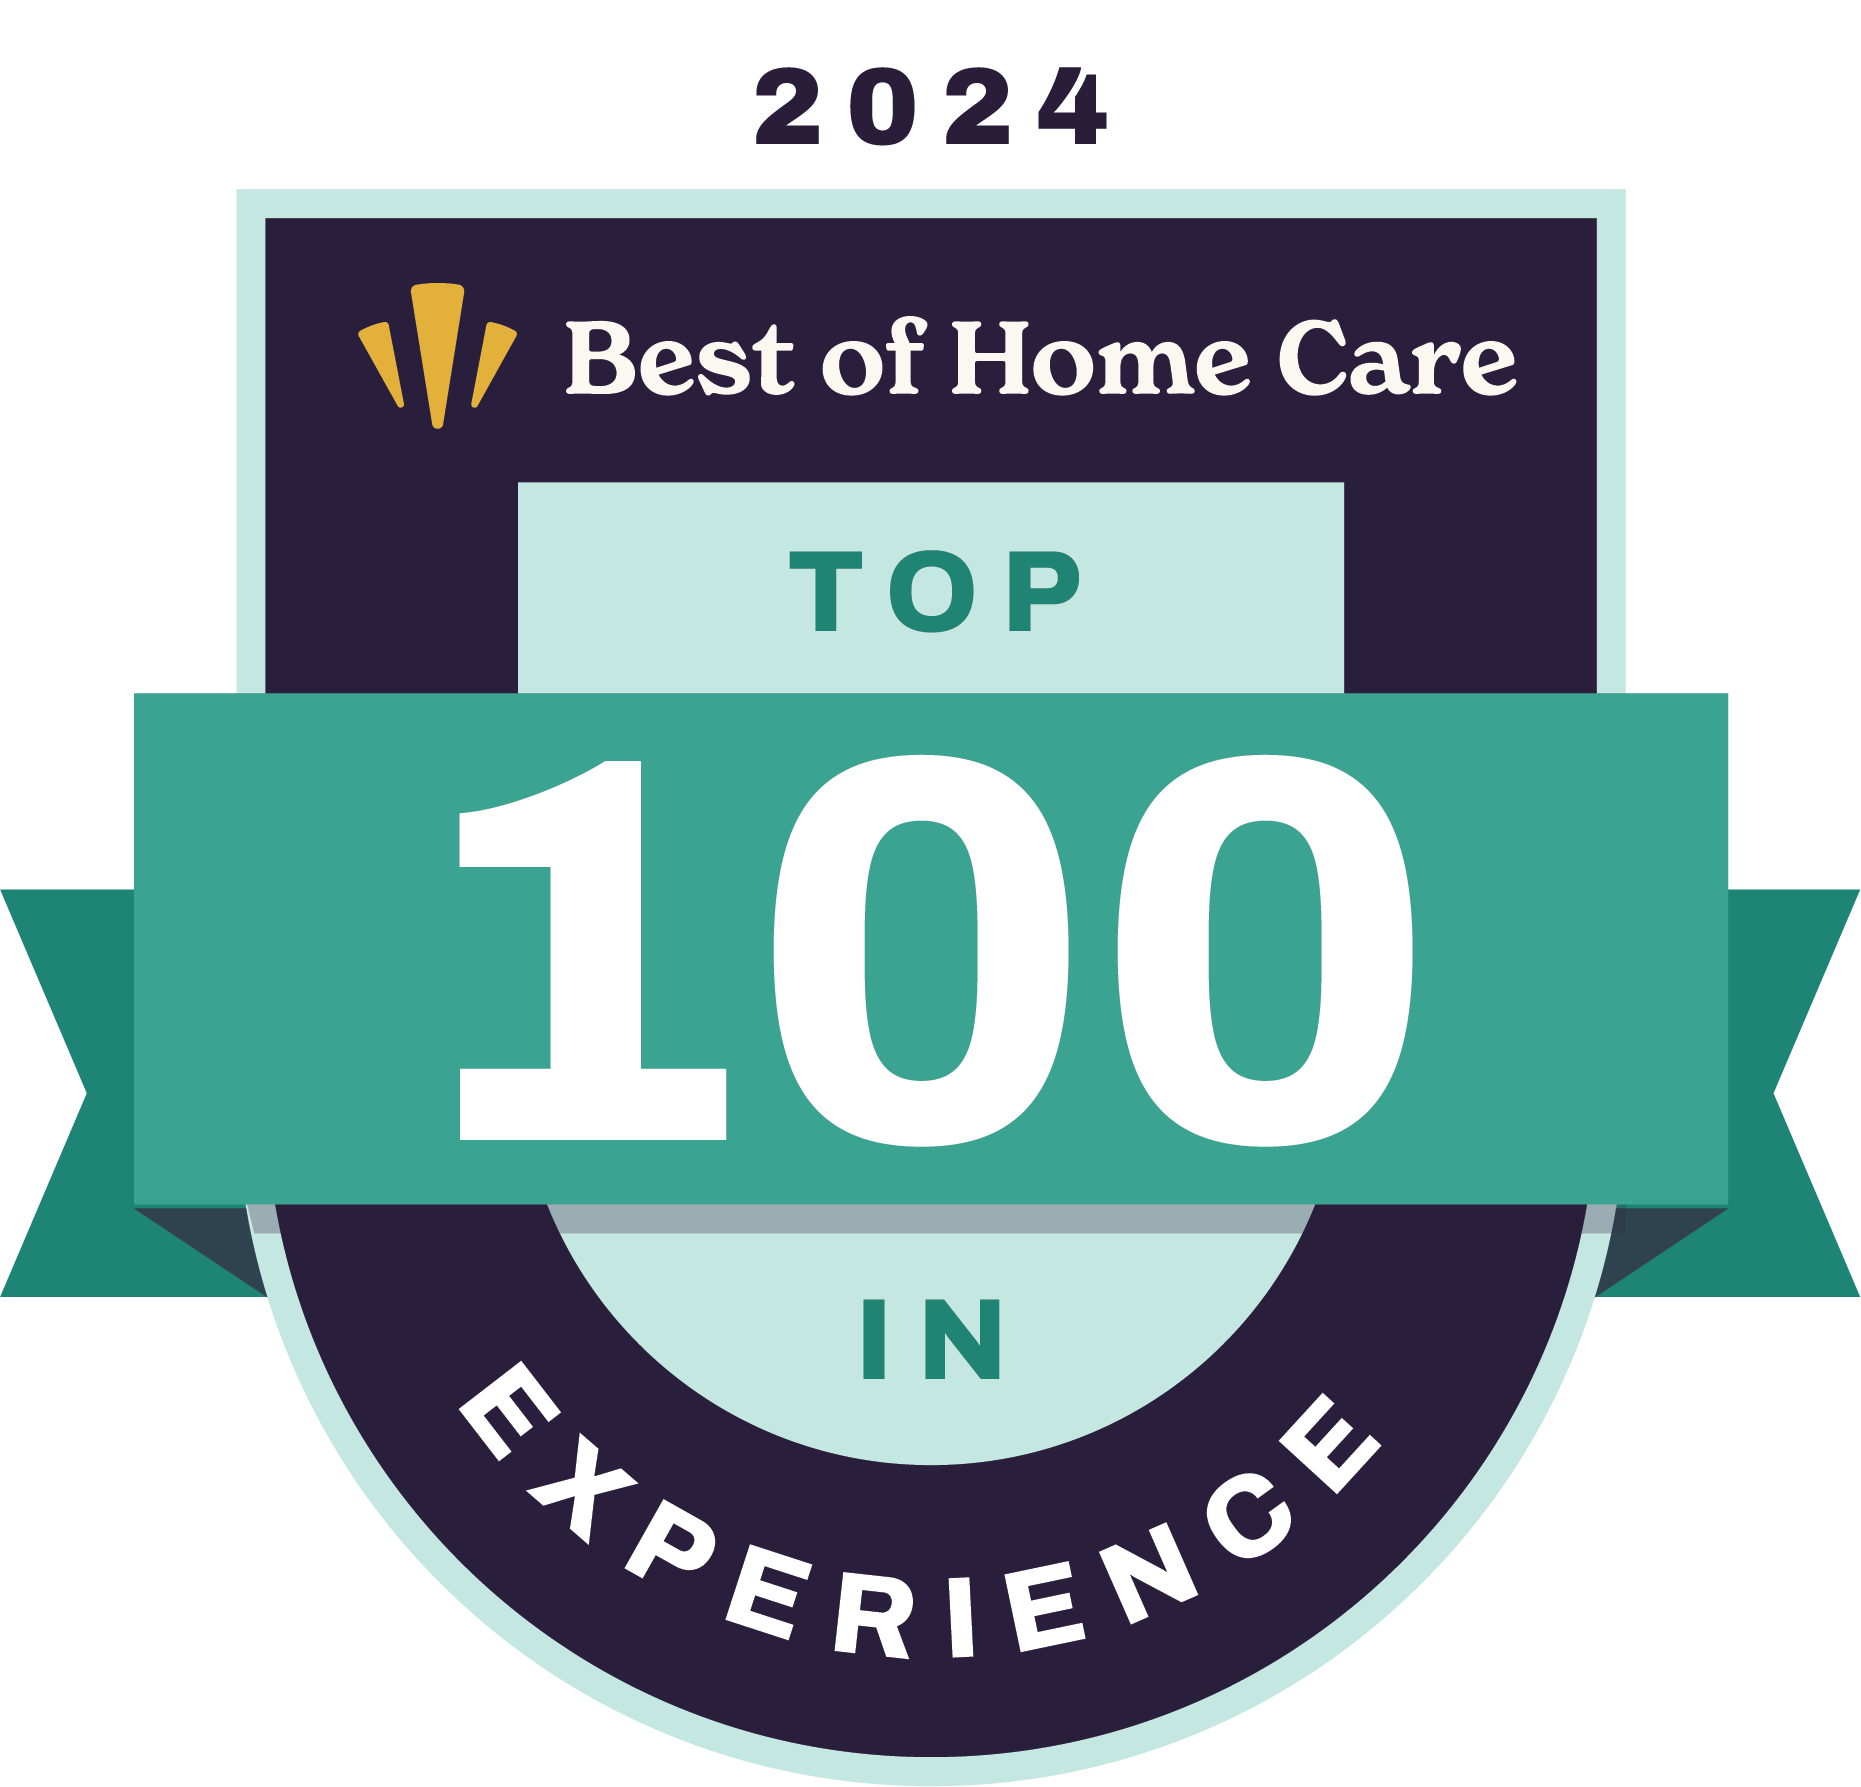 Top 100 Home Care